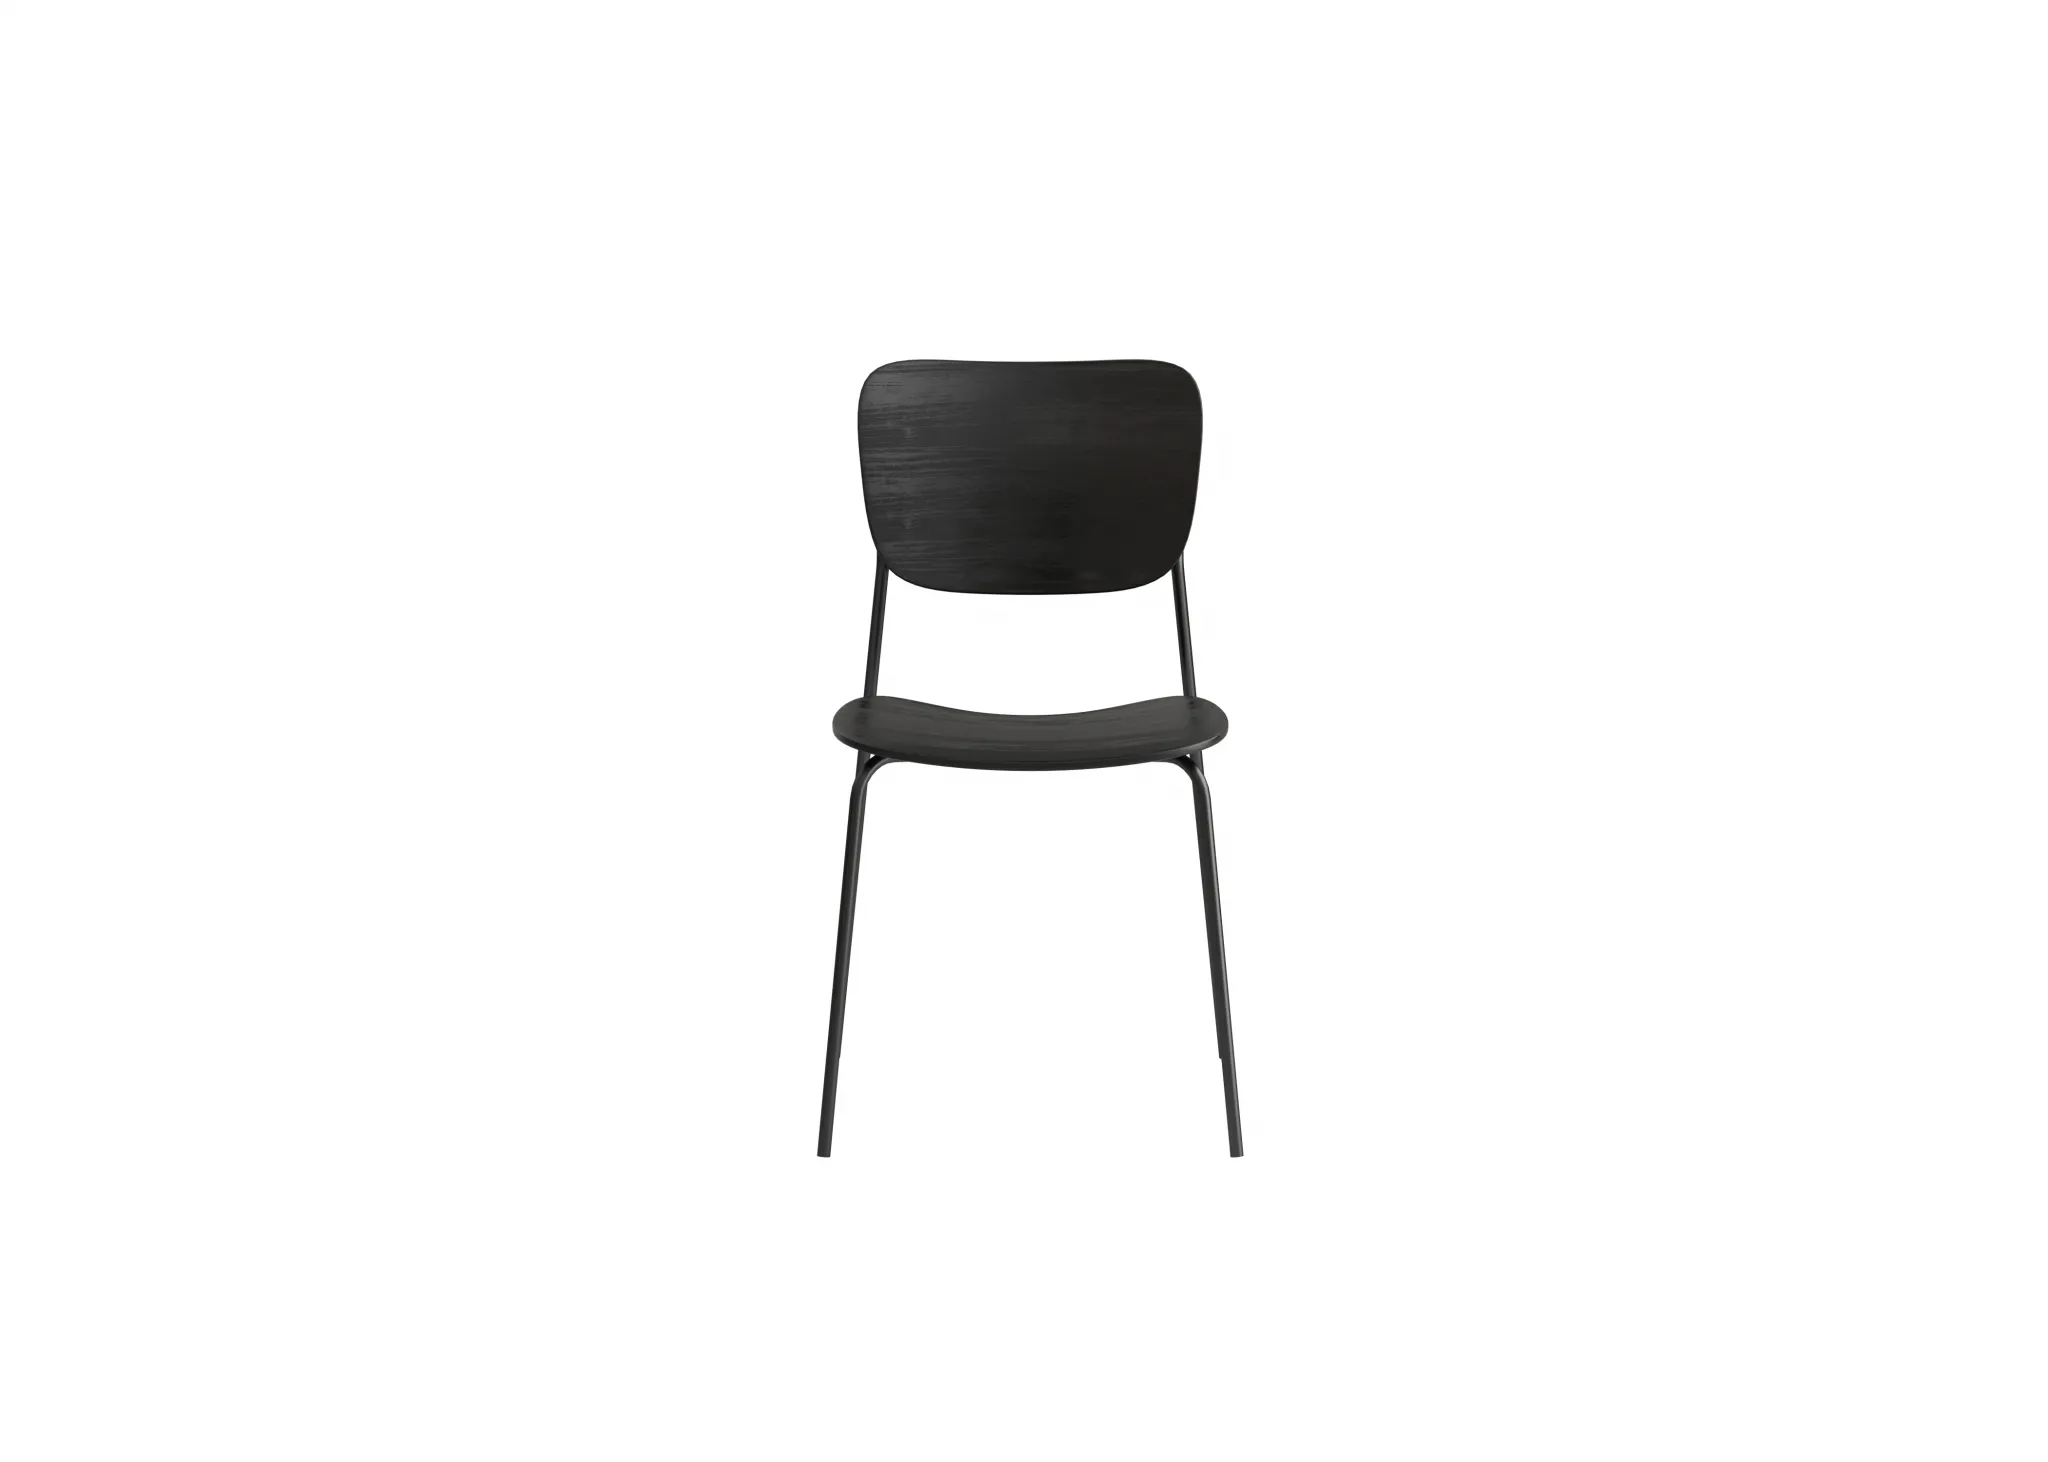 FURNITURE 3D MODELS – CHAIRS – 0299